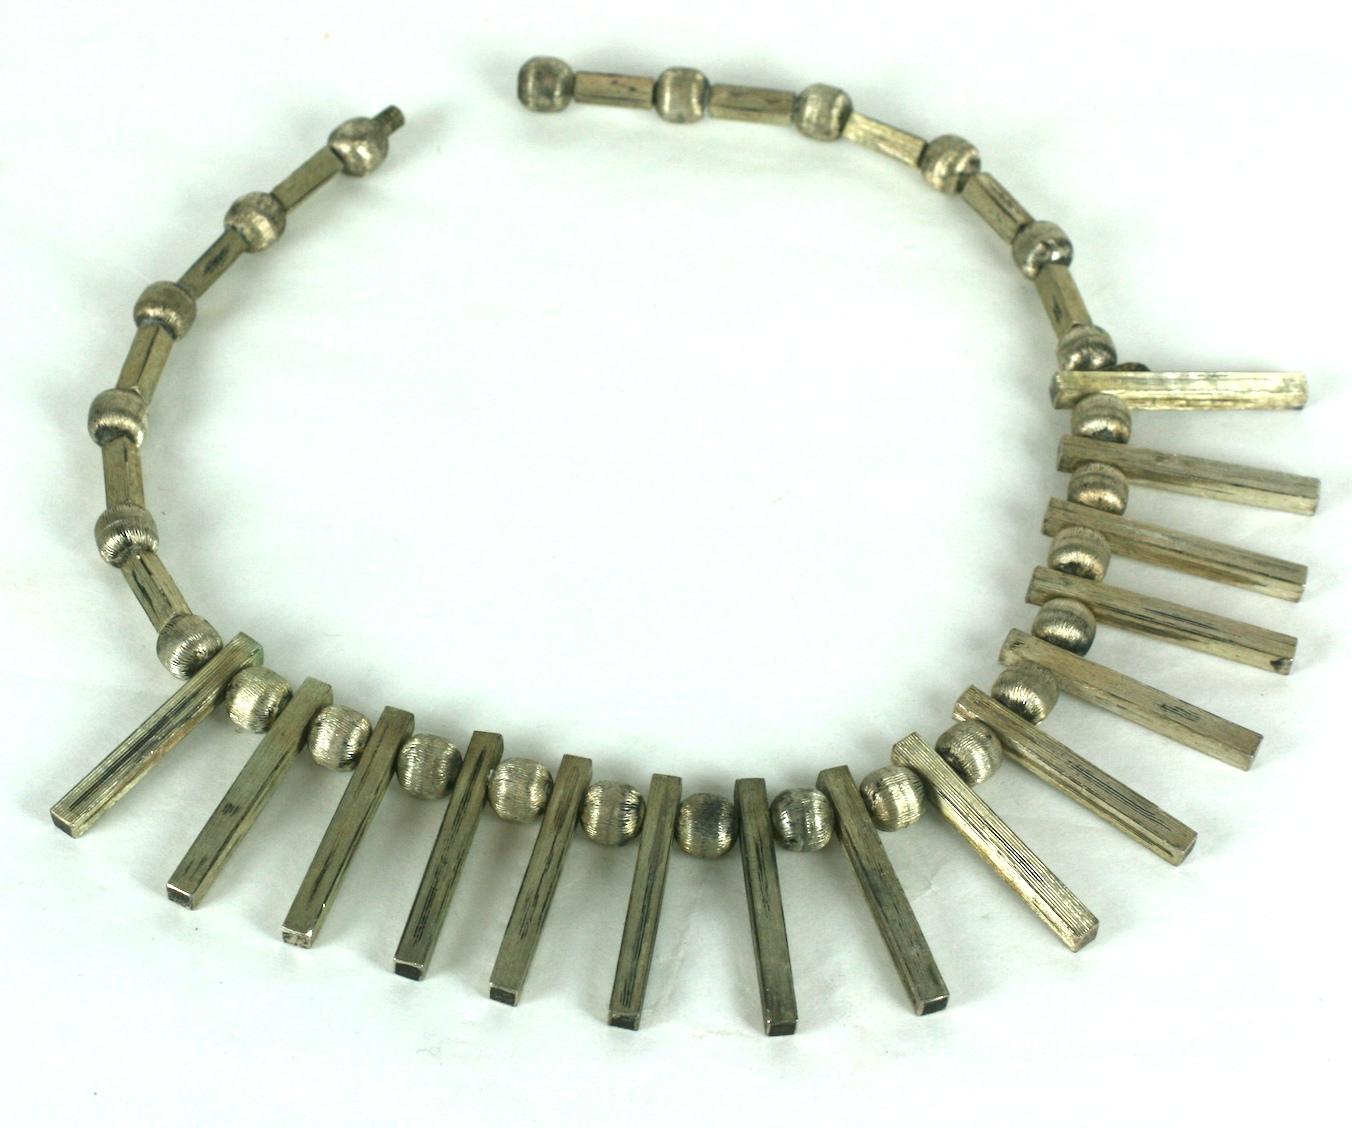 Elegant Modernist Mexican Sterling Spoke Necklace from the 1960's. Textured striated sterling in tube and bead formation. Ball bead screw clasp.  15.5